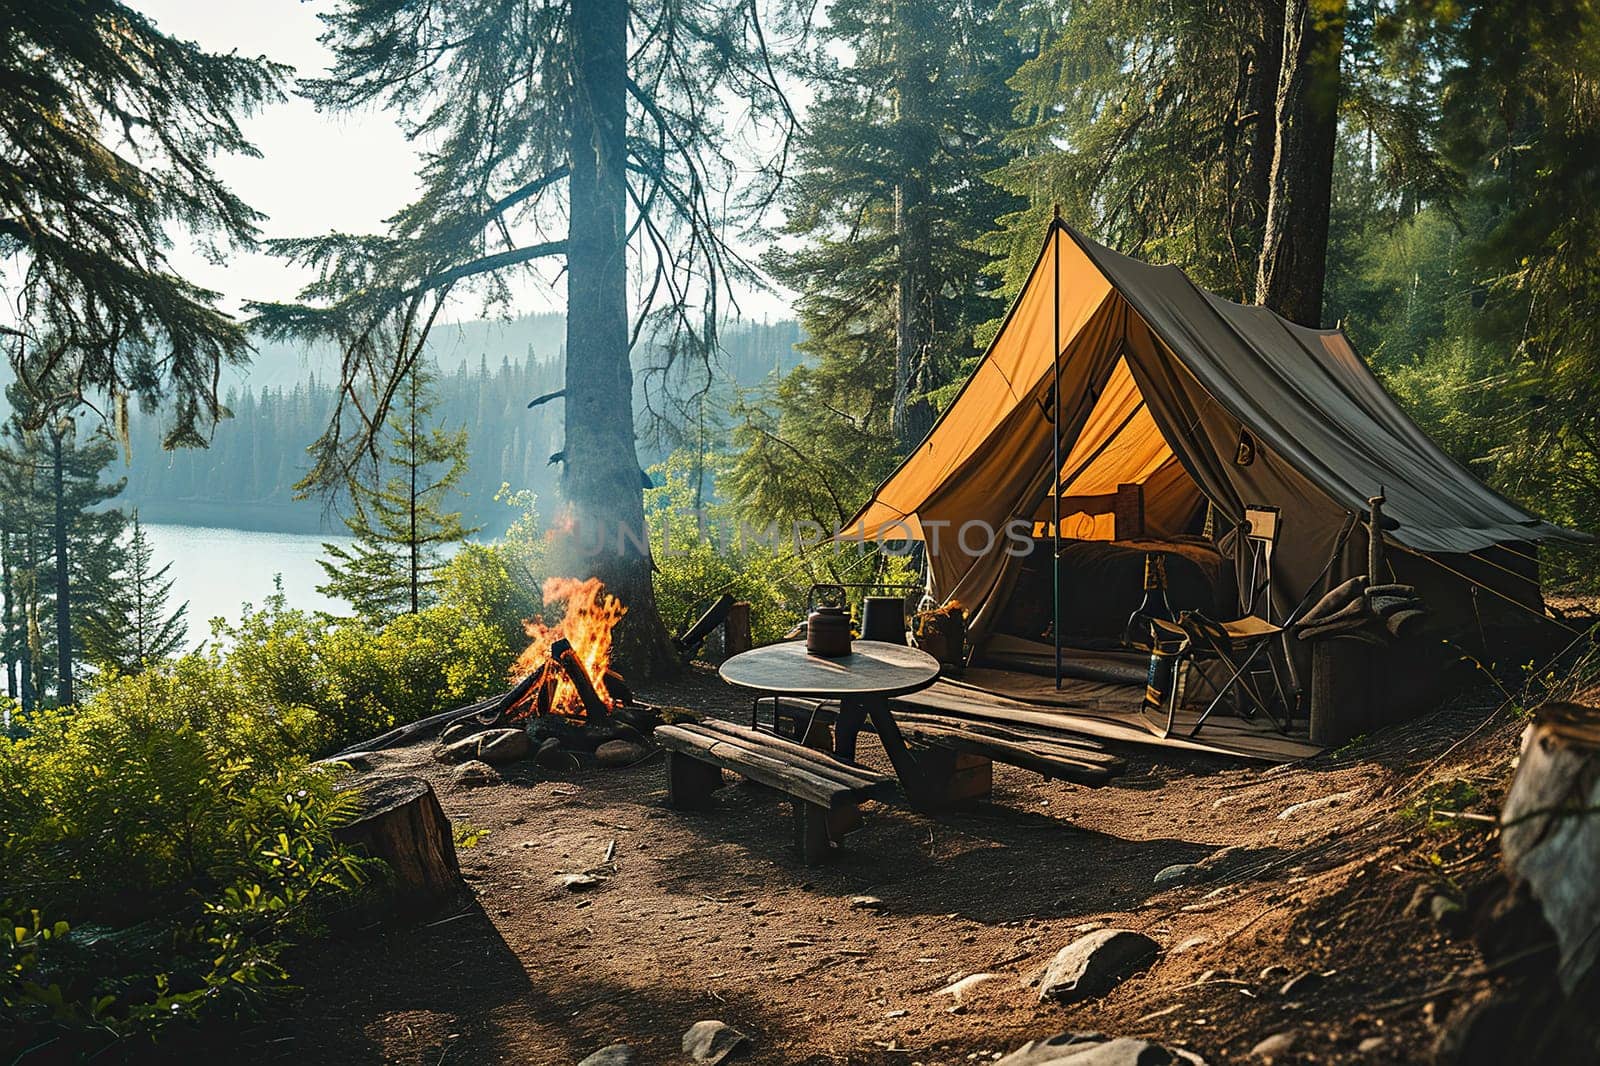 Camping with a tent and a fire in the forest. Generated by artificial intelligence by Vovmar